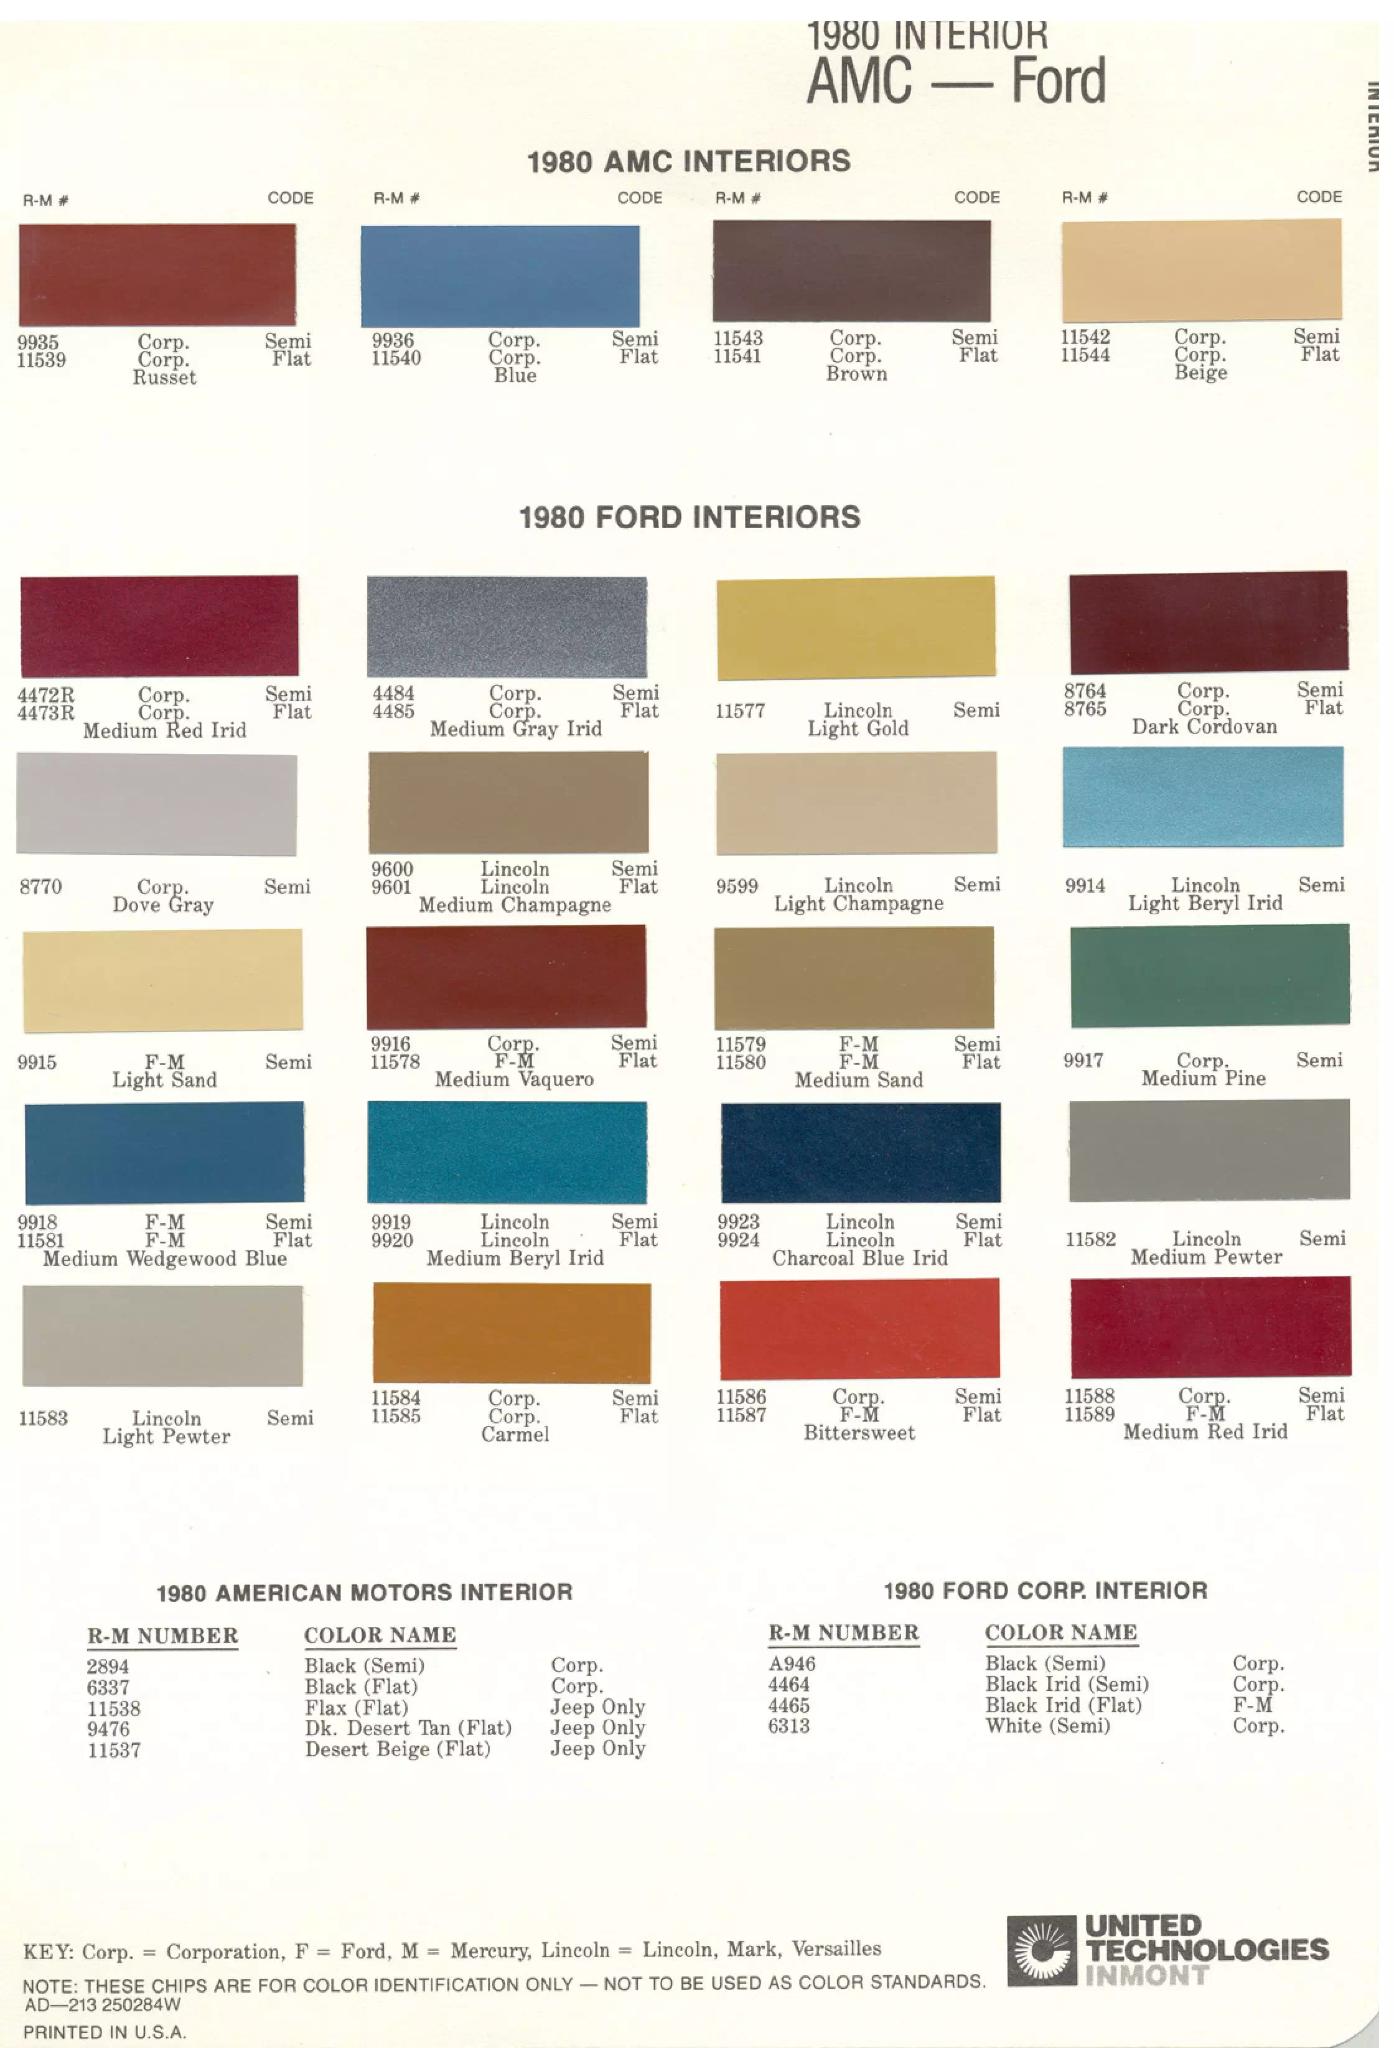 Color Codes used to repaint Interiors on Ford Motor Company Vehicles in 1980